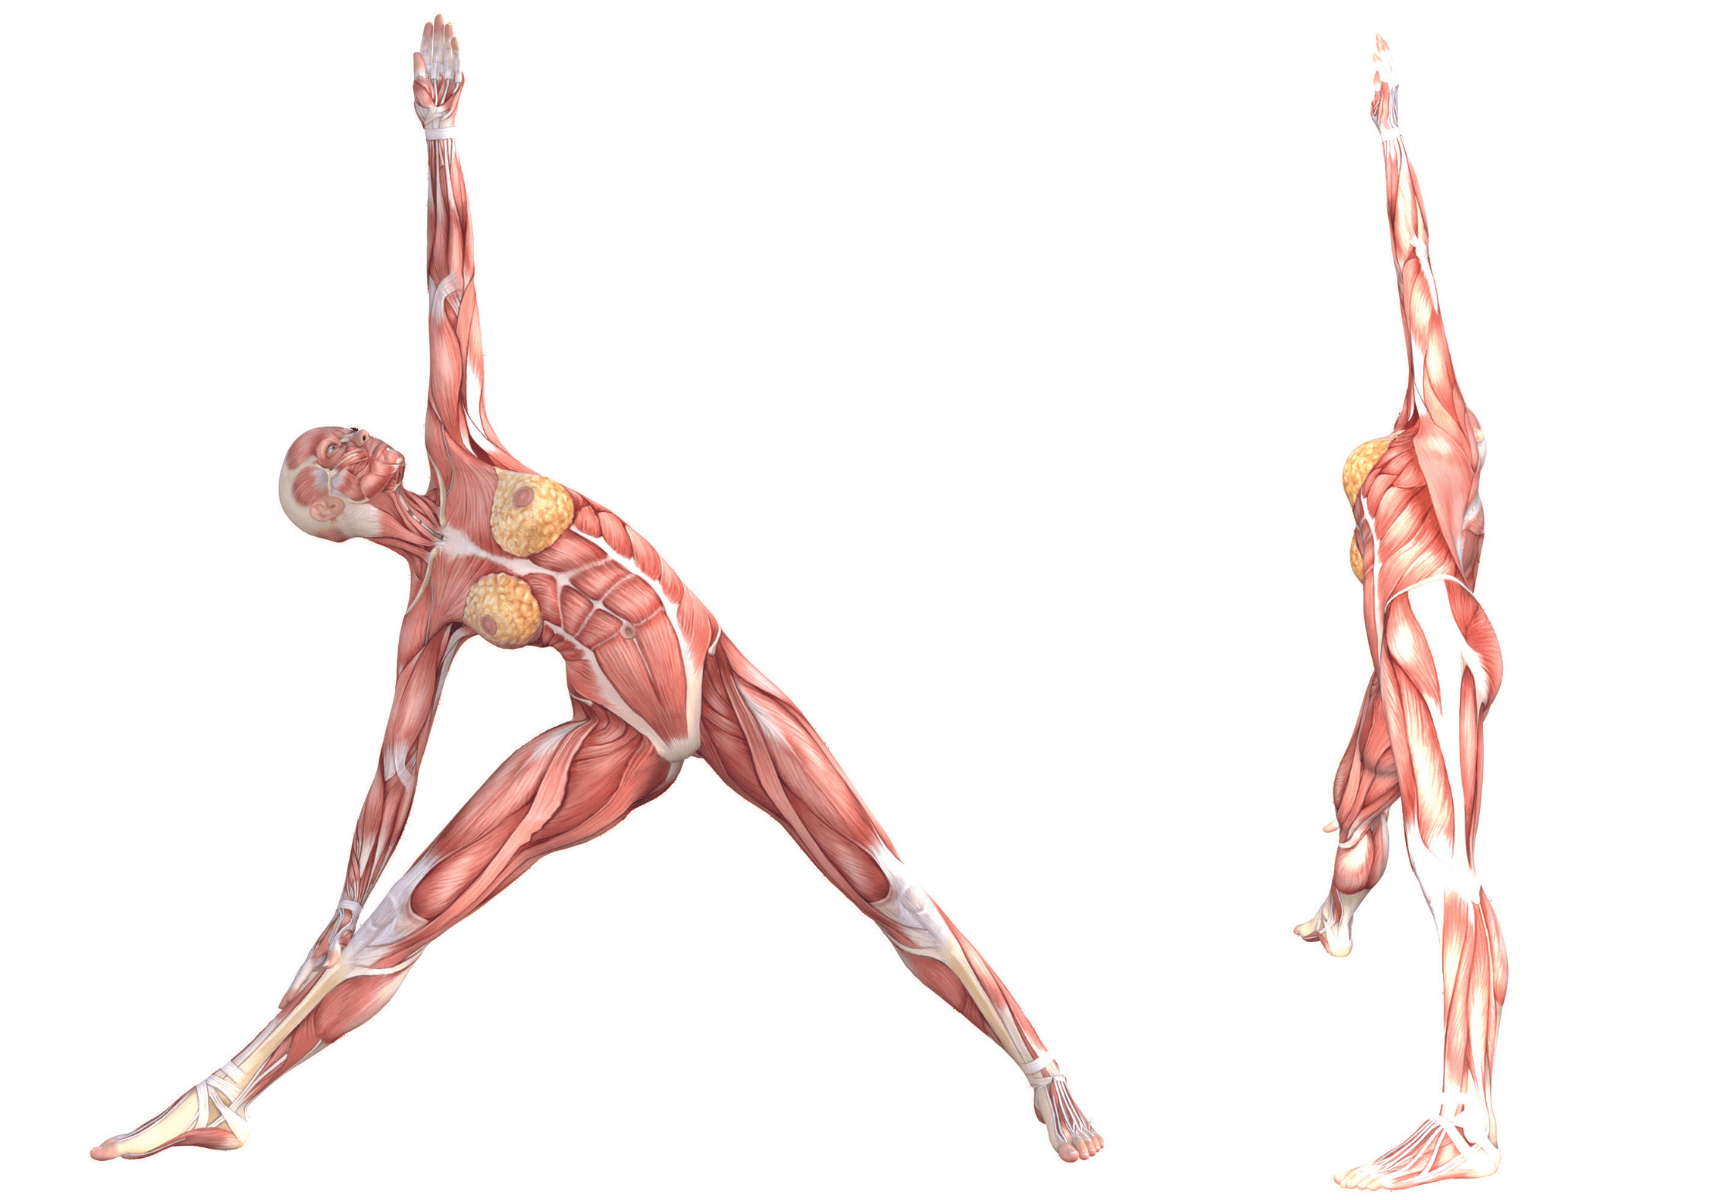 Warrior Variations: 3 Poses to Strengthen Your Body - SilverSneakers